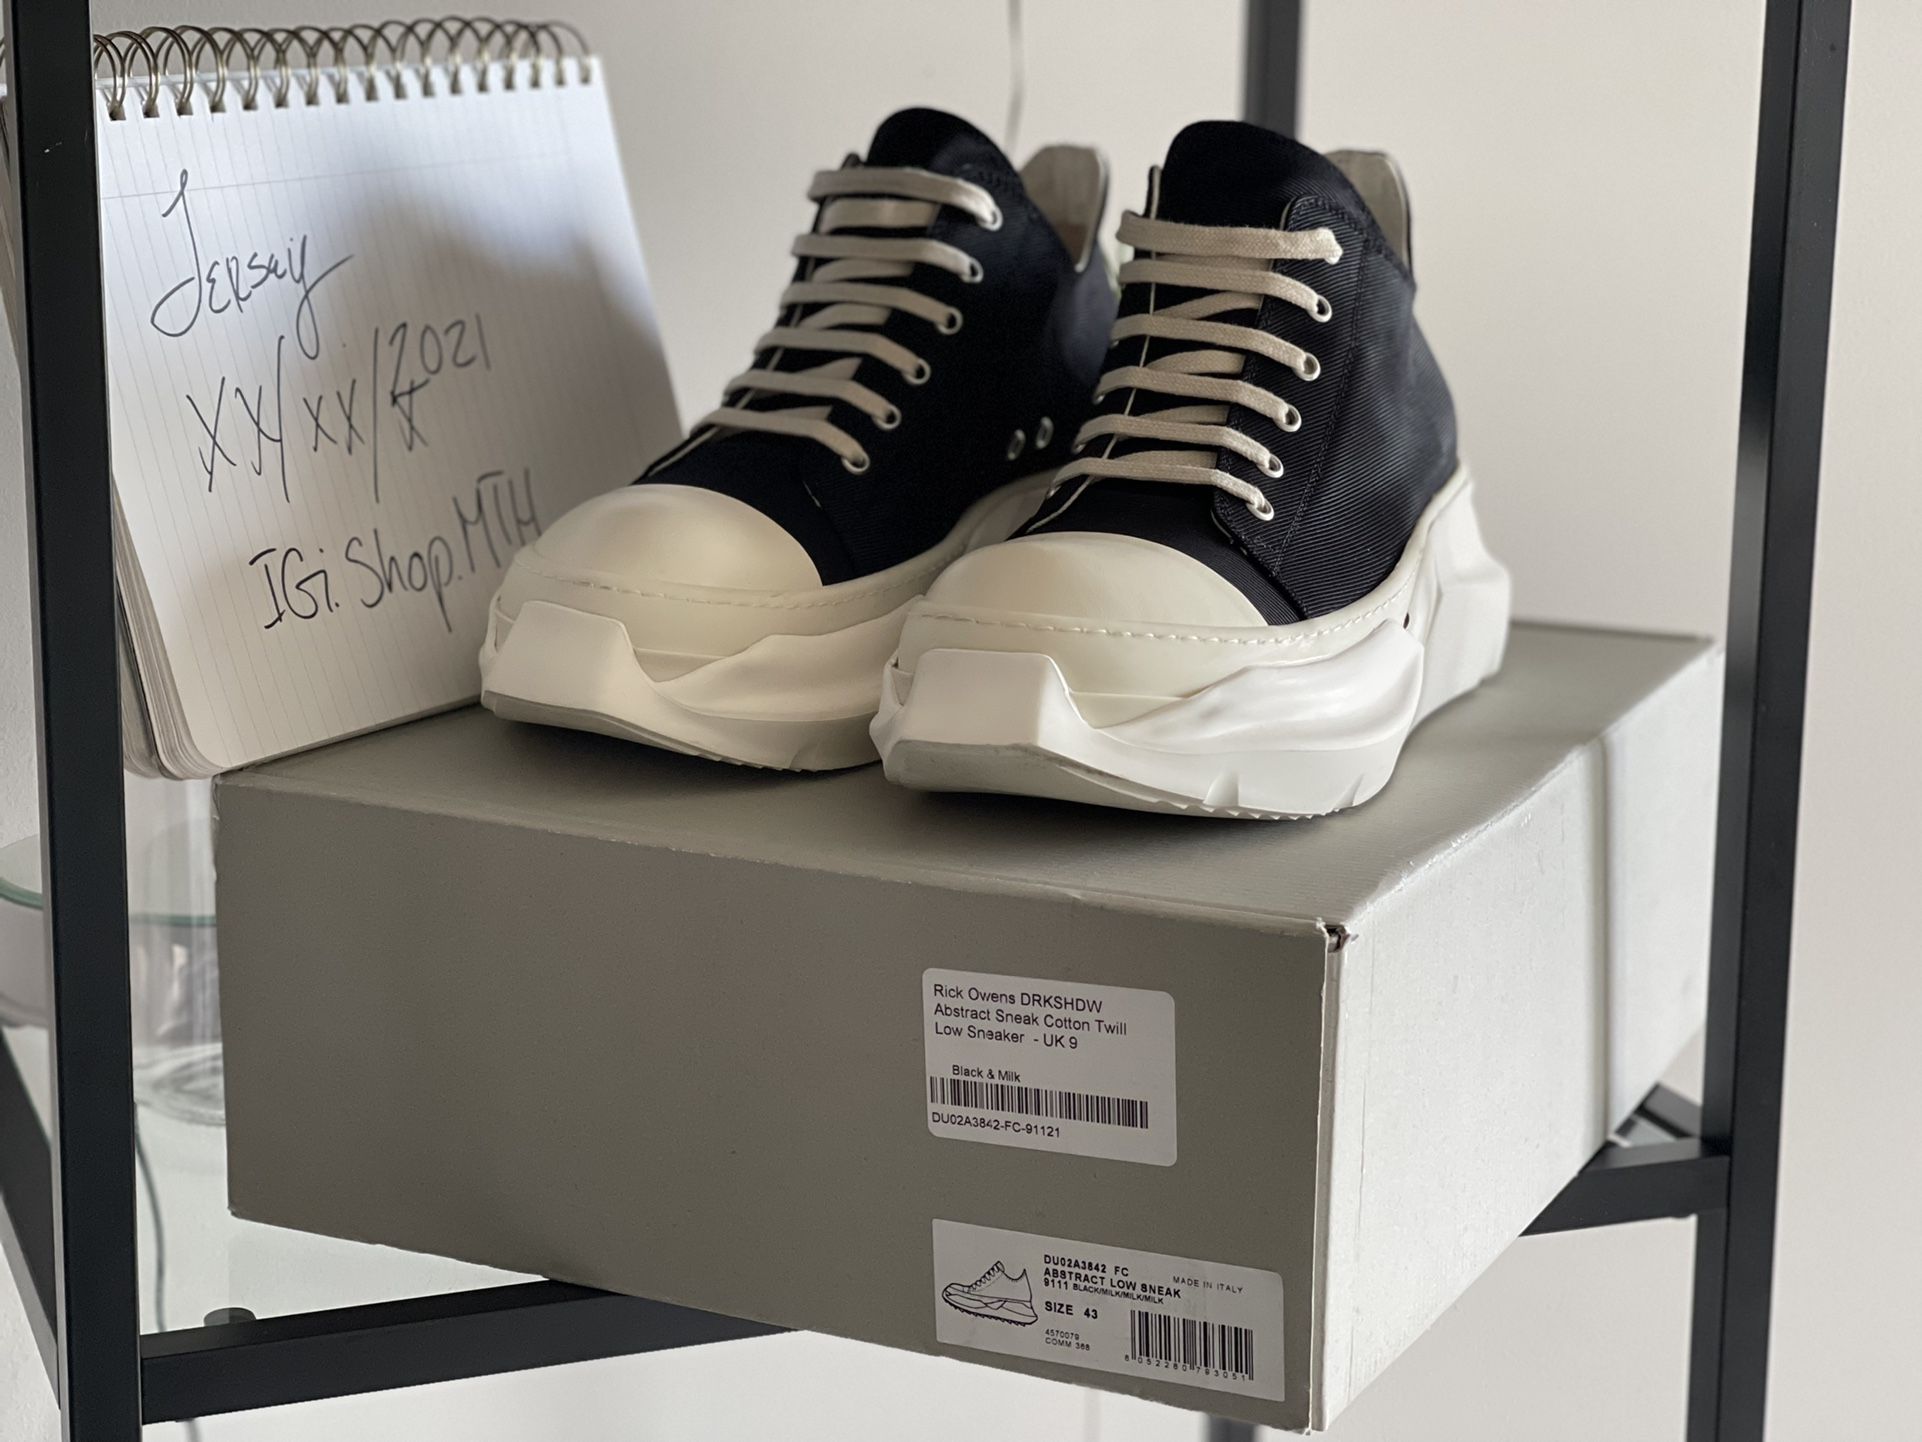 Rick Owens Drkshw Abstract Lows